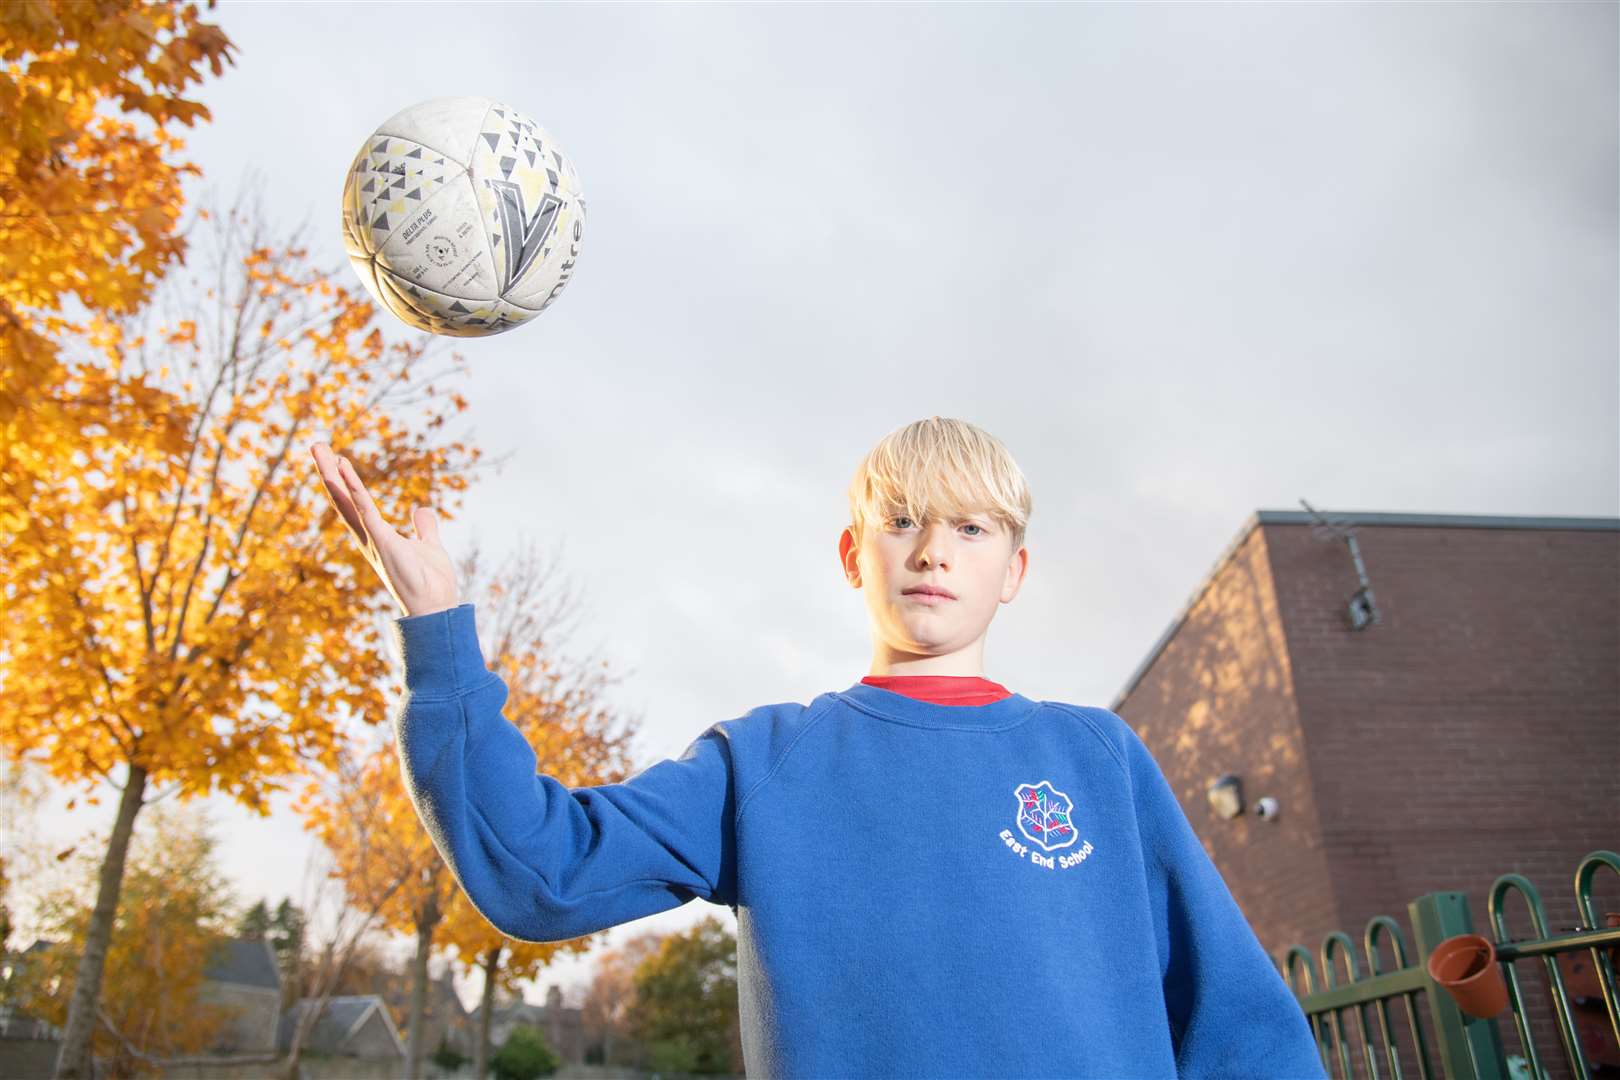 Joseph Sinclair raised money for new football kits for pupils at East End Primary School. Picture: Daniel Forsyth